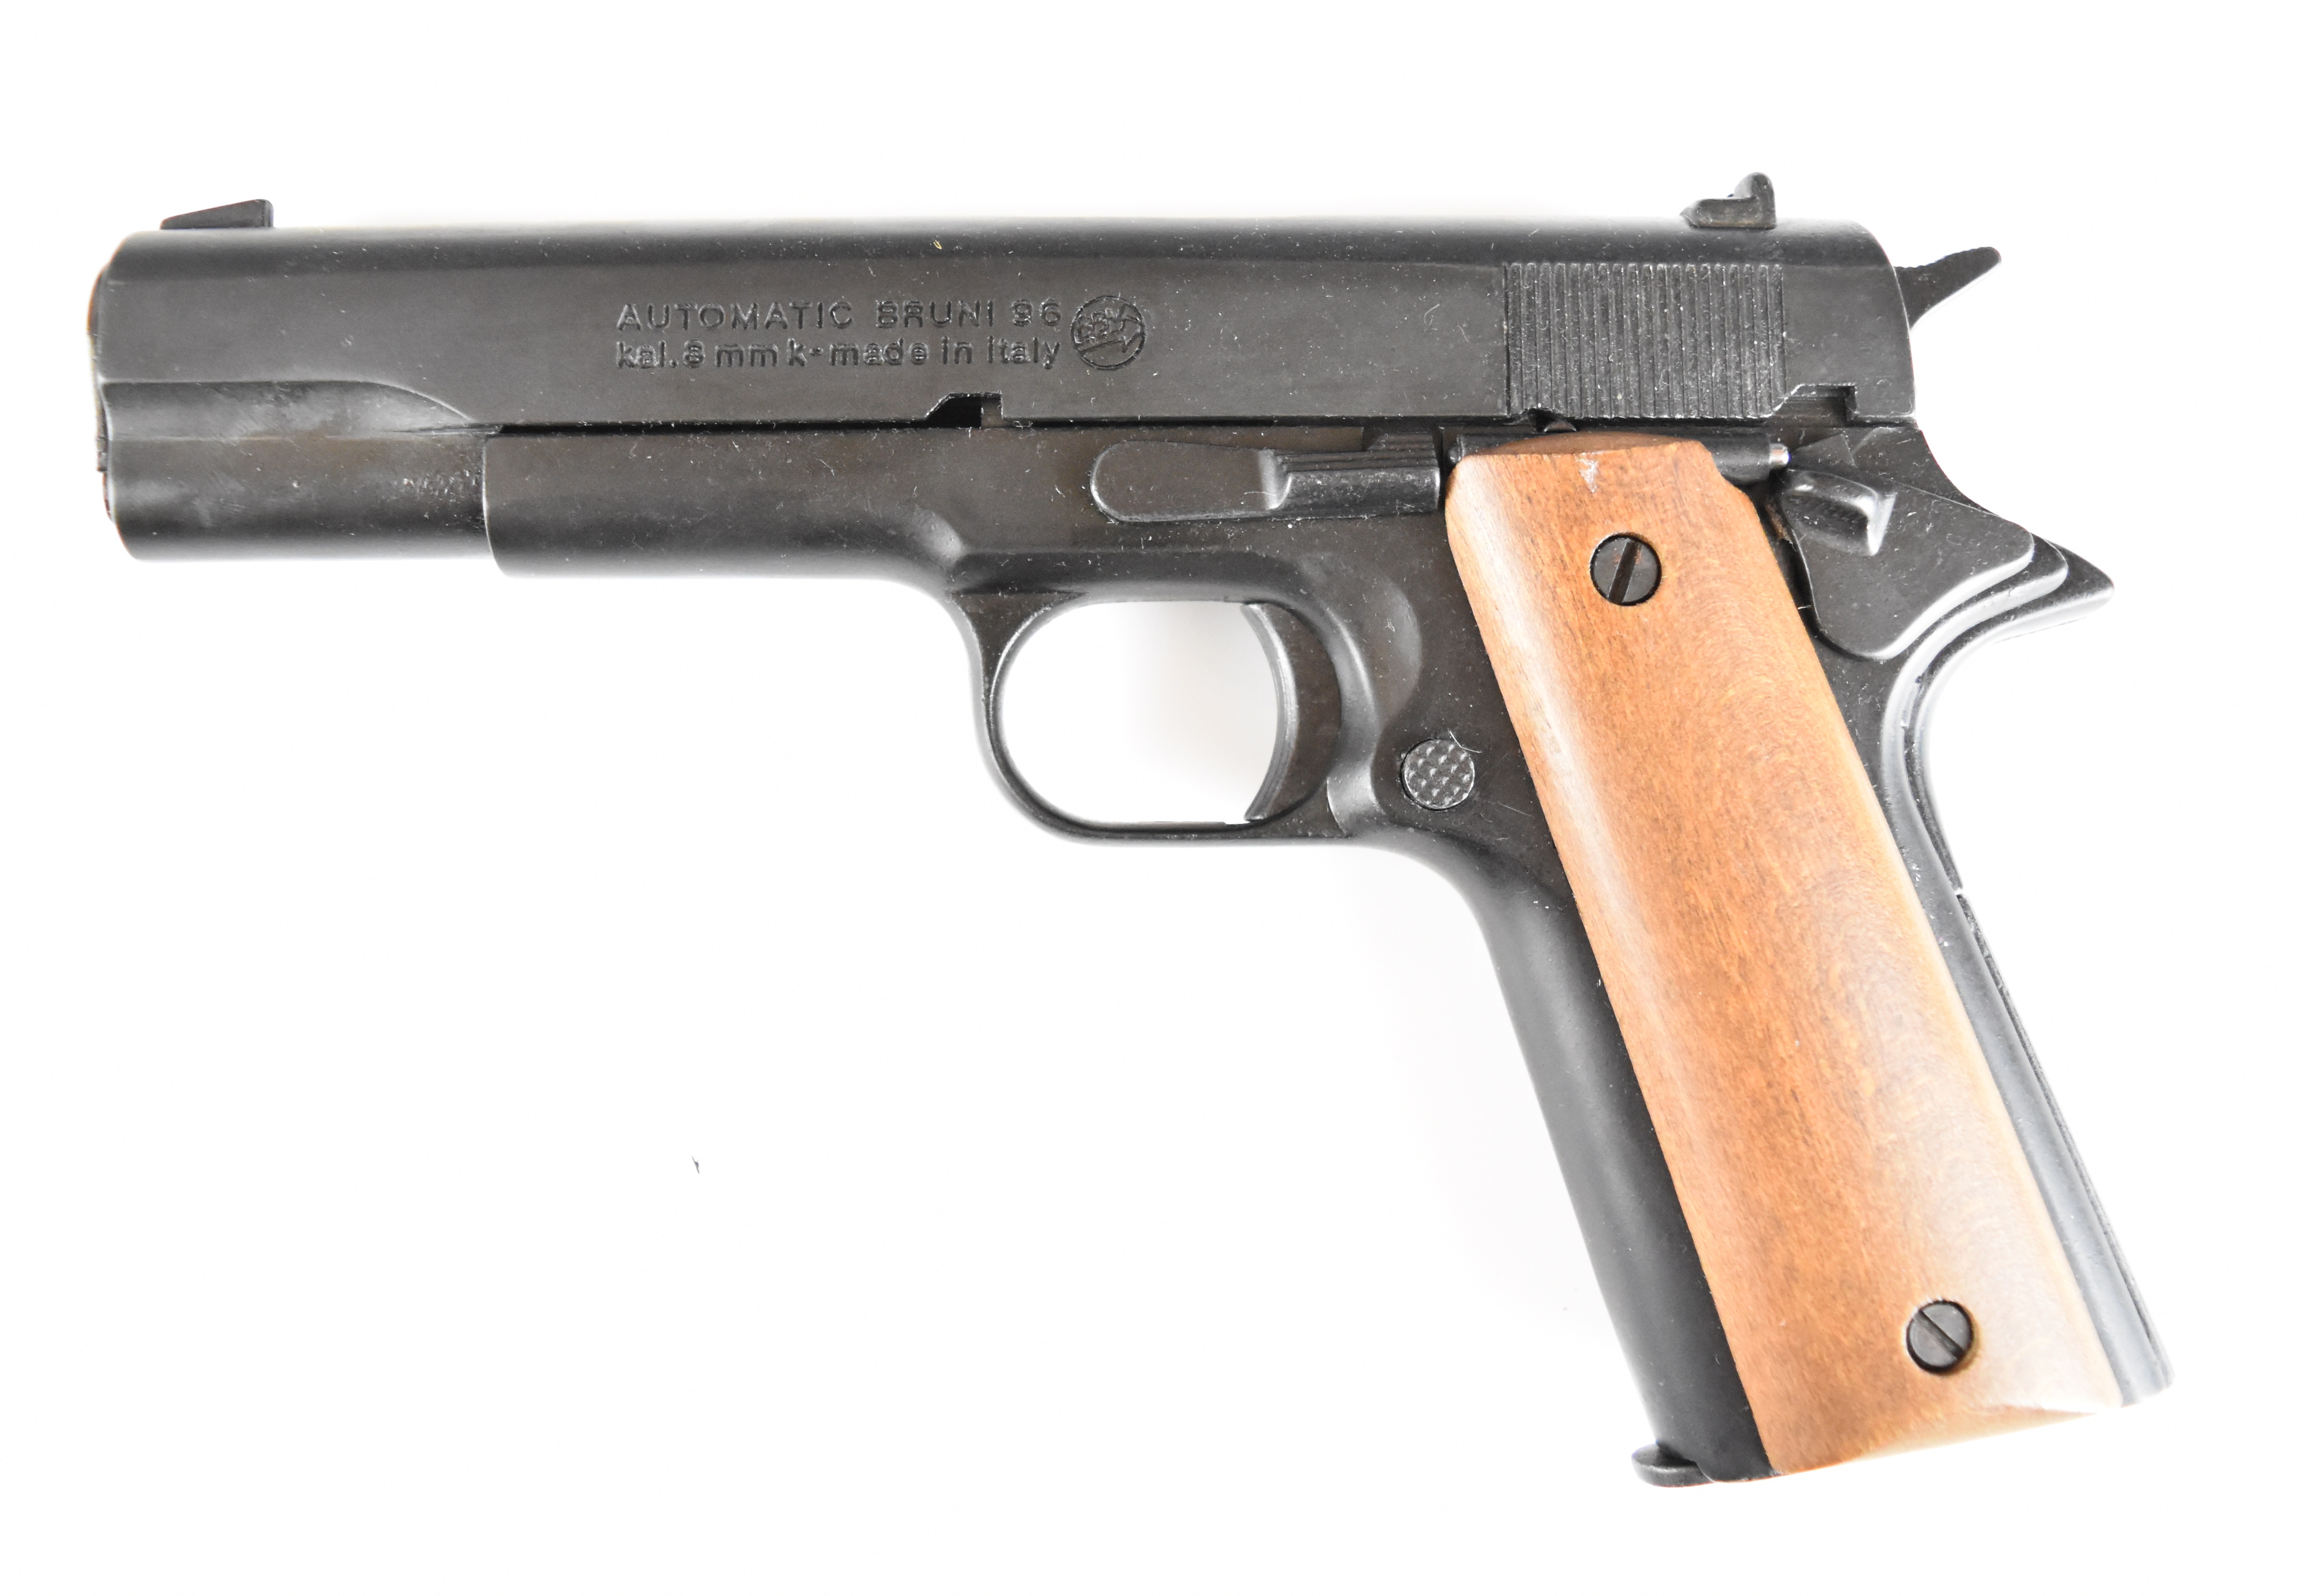 BBM Bruni 96 8mm blank firing pistol with wooden grips, in original box with instruction manual - Image 3 of 12